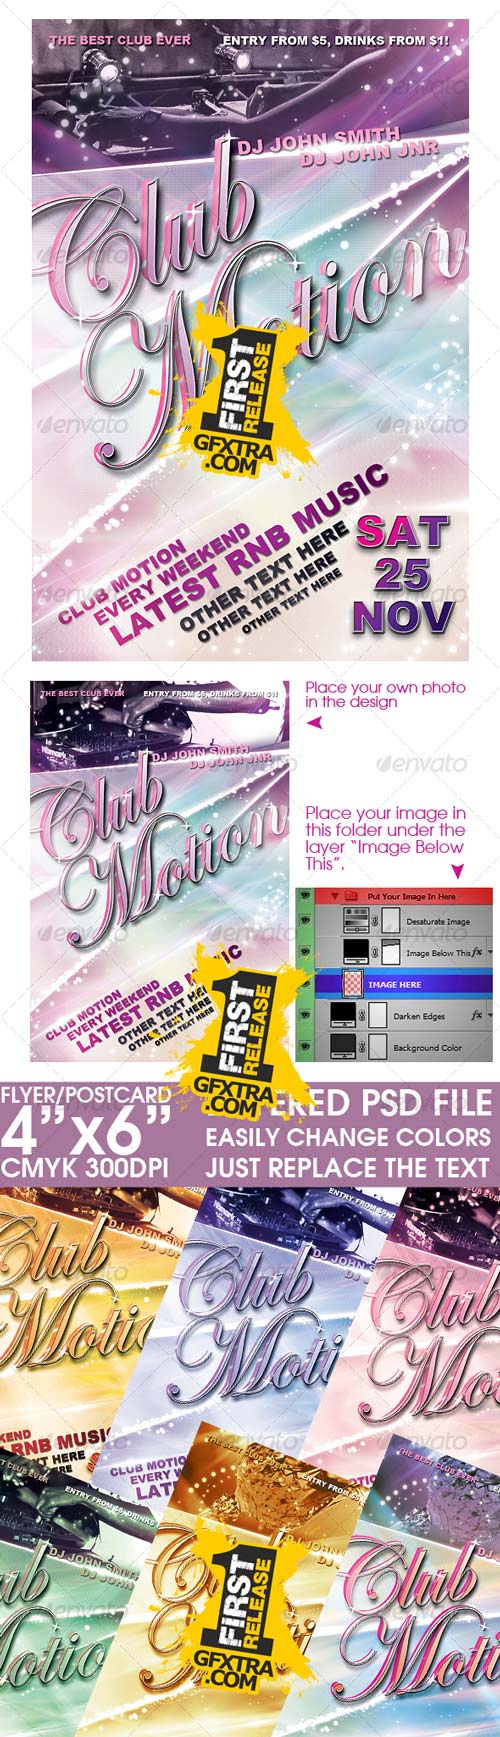 Flyer/Post Card Template - GraphicRiver